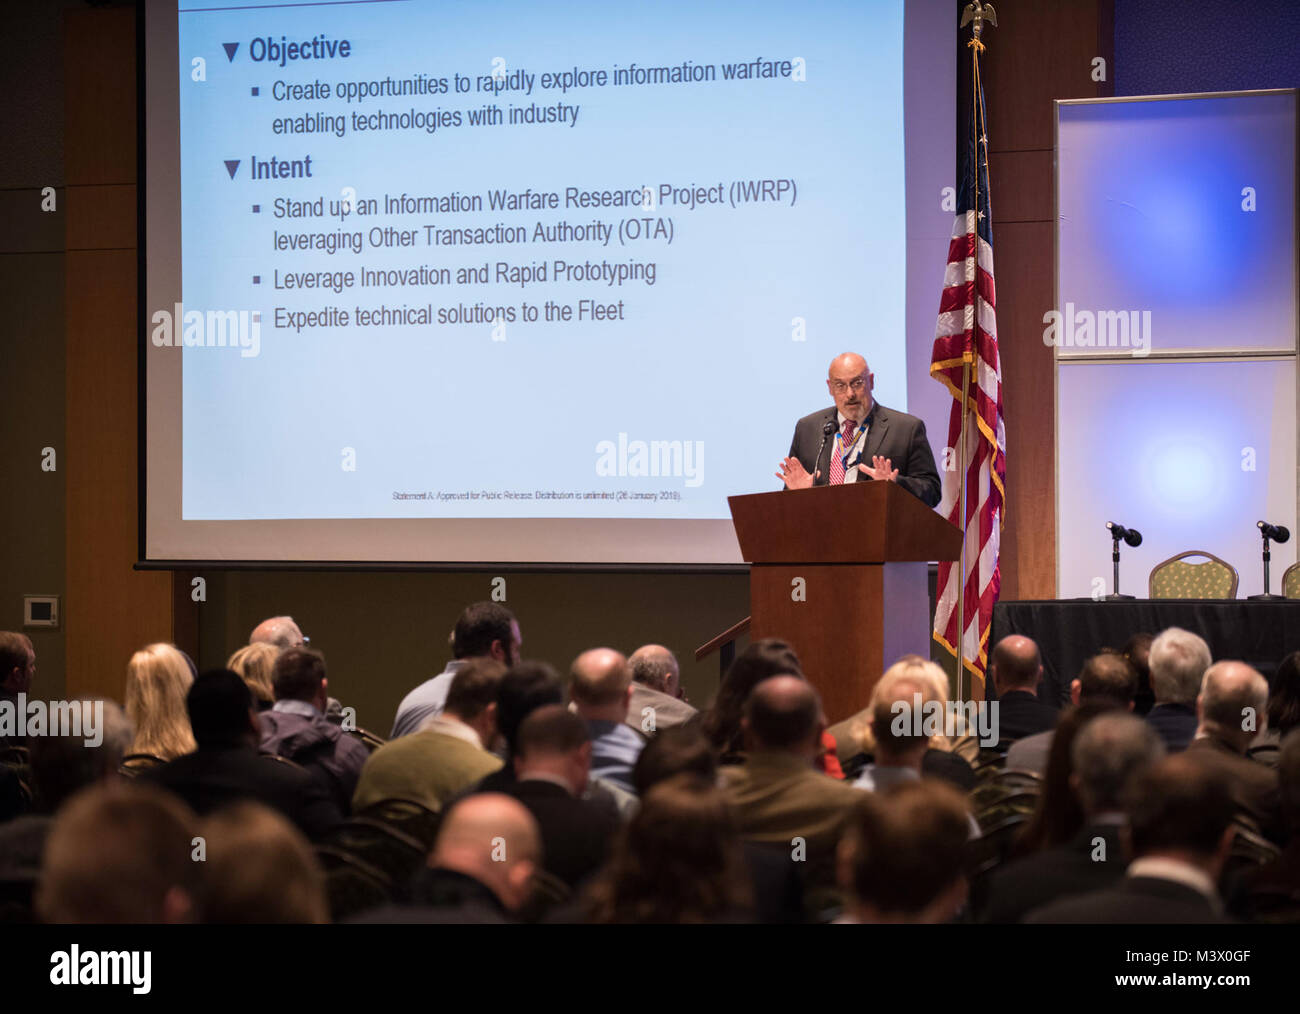 180201-N-GB257-001  Charleston, S.C. (February 01, 2018) Space and Naval Warfare Systems Center (SSC) Atlantic Deputy Executive Director William Deligne stresses the value of the Information Warfare Research Project (IWRP) as an enabler of rapid research and prototyping and increased access to innovative commercial solutions. SSC Atlantic and Pacific leadership hosted an Industry Day where they also shared information about new contracting opportunities using Other Transaction Authority (OTA) as an alternative to the traditional acquisition process. SSC Atlantic develops, acquires and provides Stock Photo